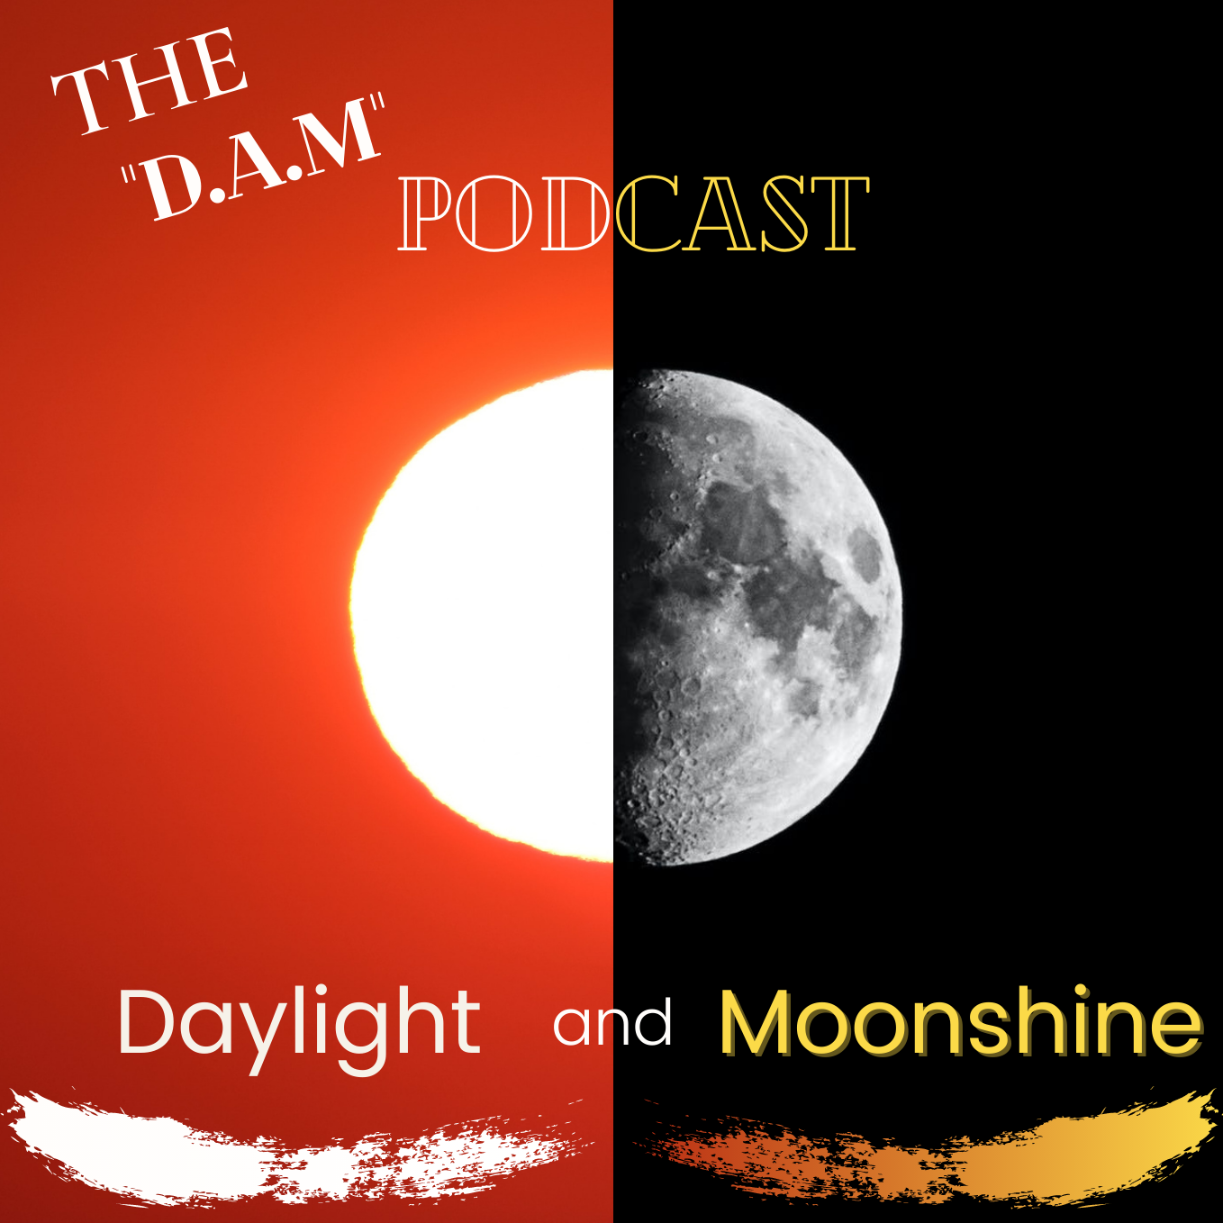 Daylight and Moonshine      The ”D.A.M” Podcast